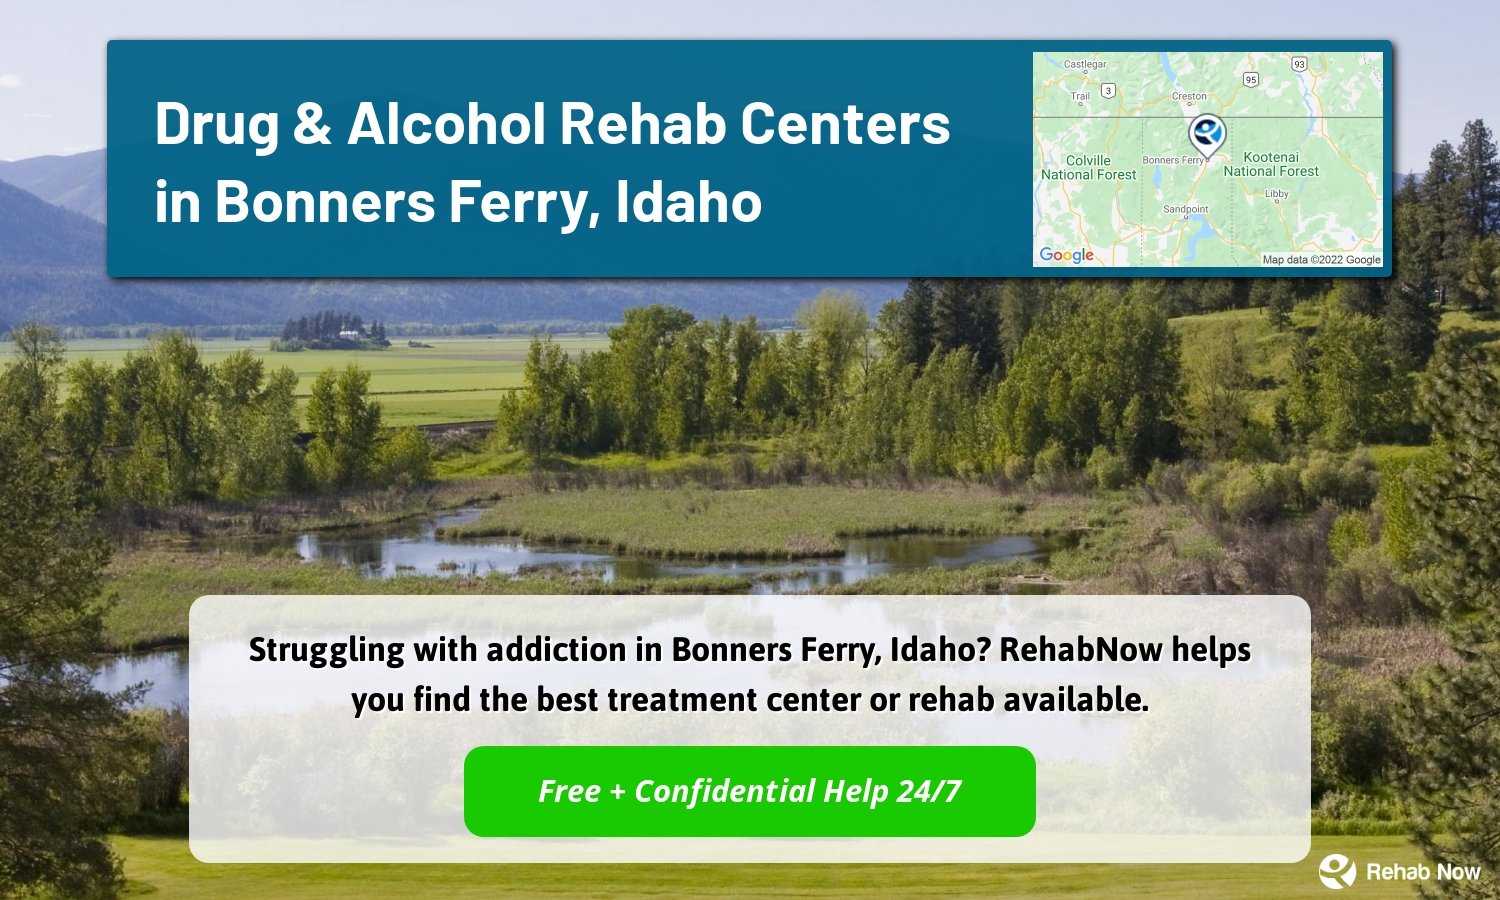 Struggling with addiction in Bonners Ferry, Idaho? RehabNow helps you find the best treatment center or rehab available.